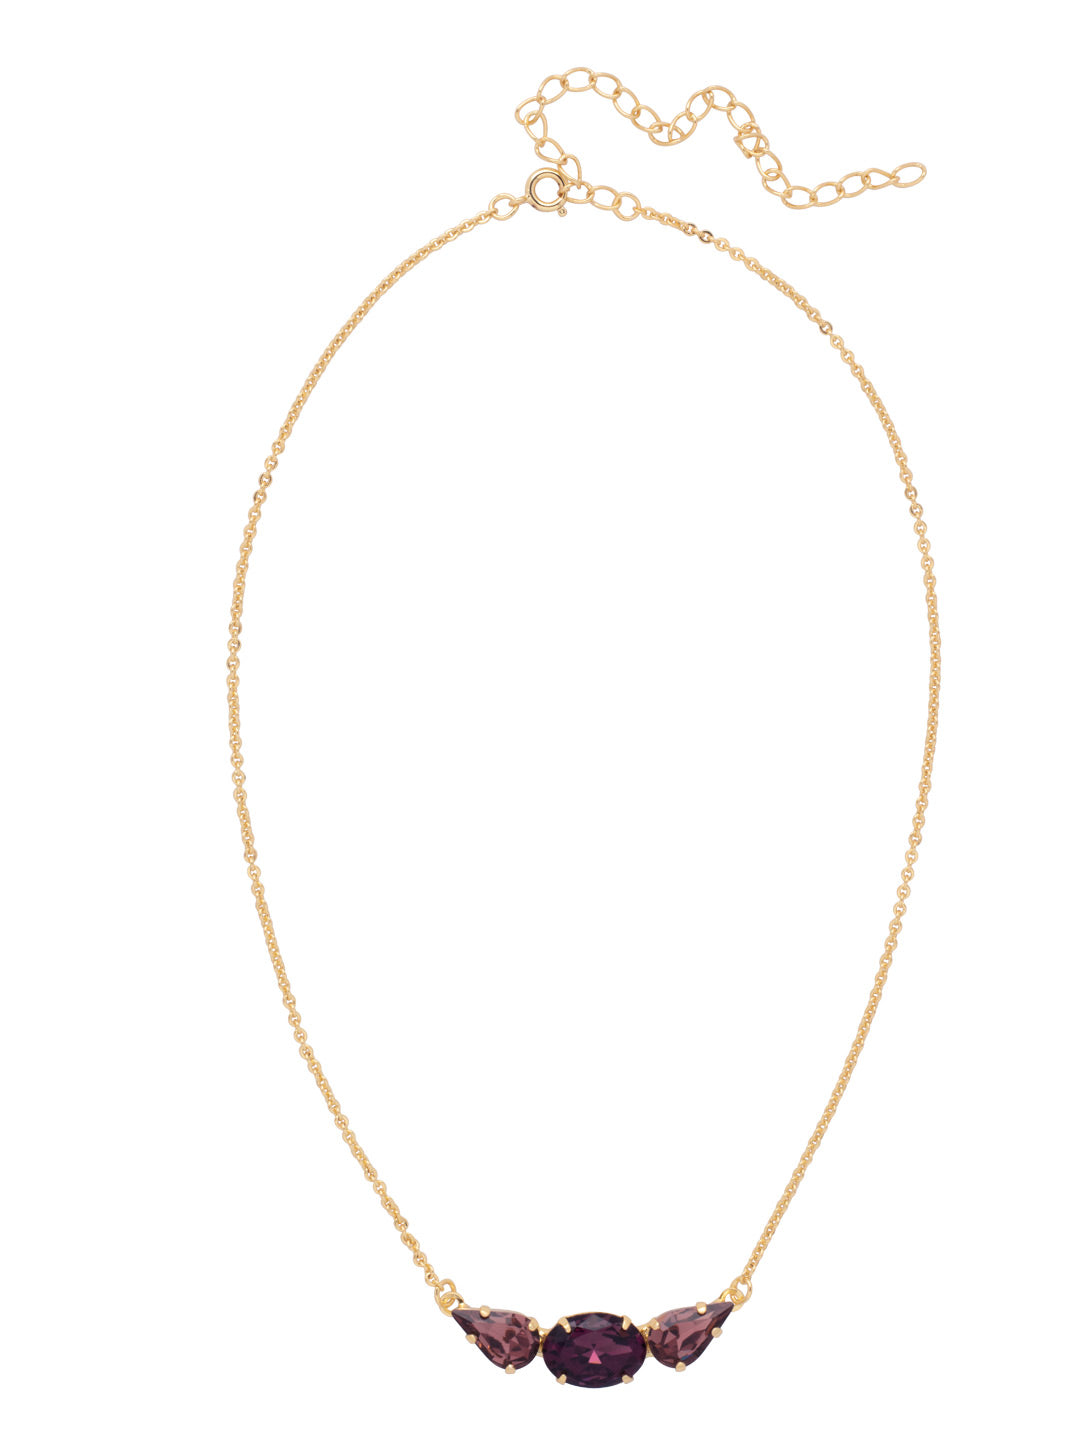 Oval and Pear Tennis Necklace - NFL14BGMRL